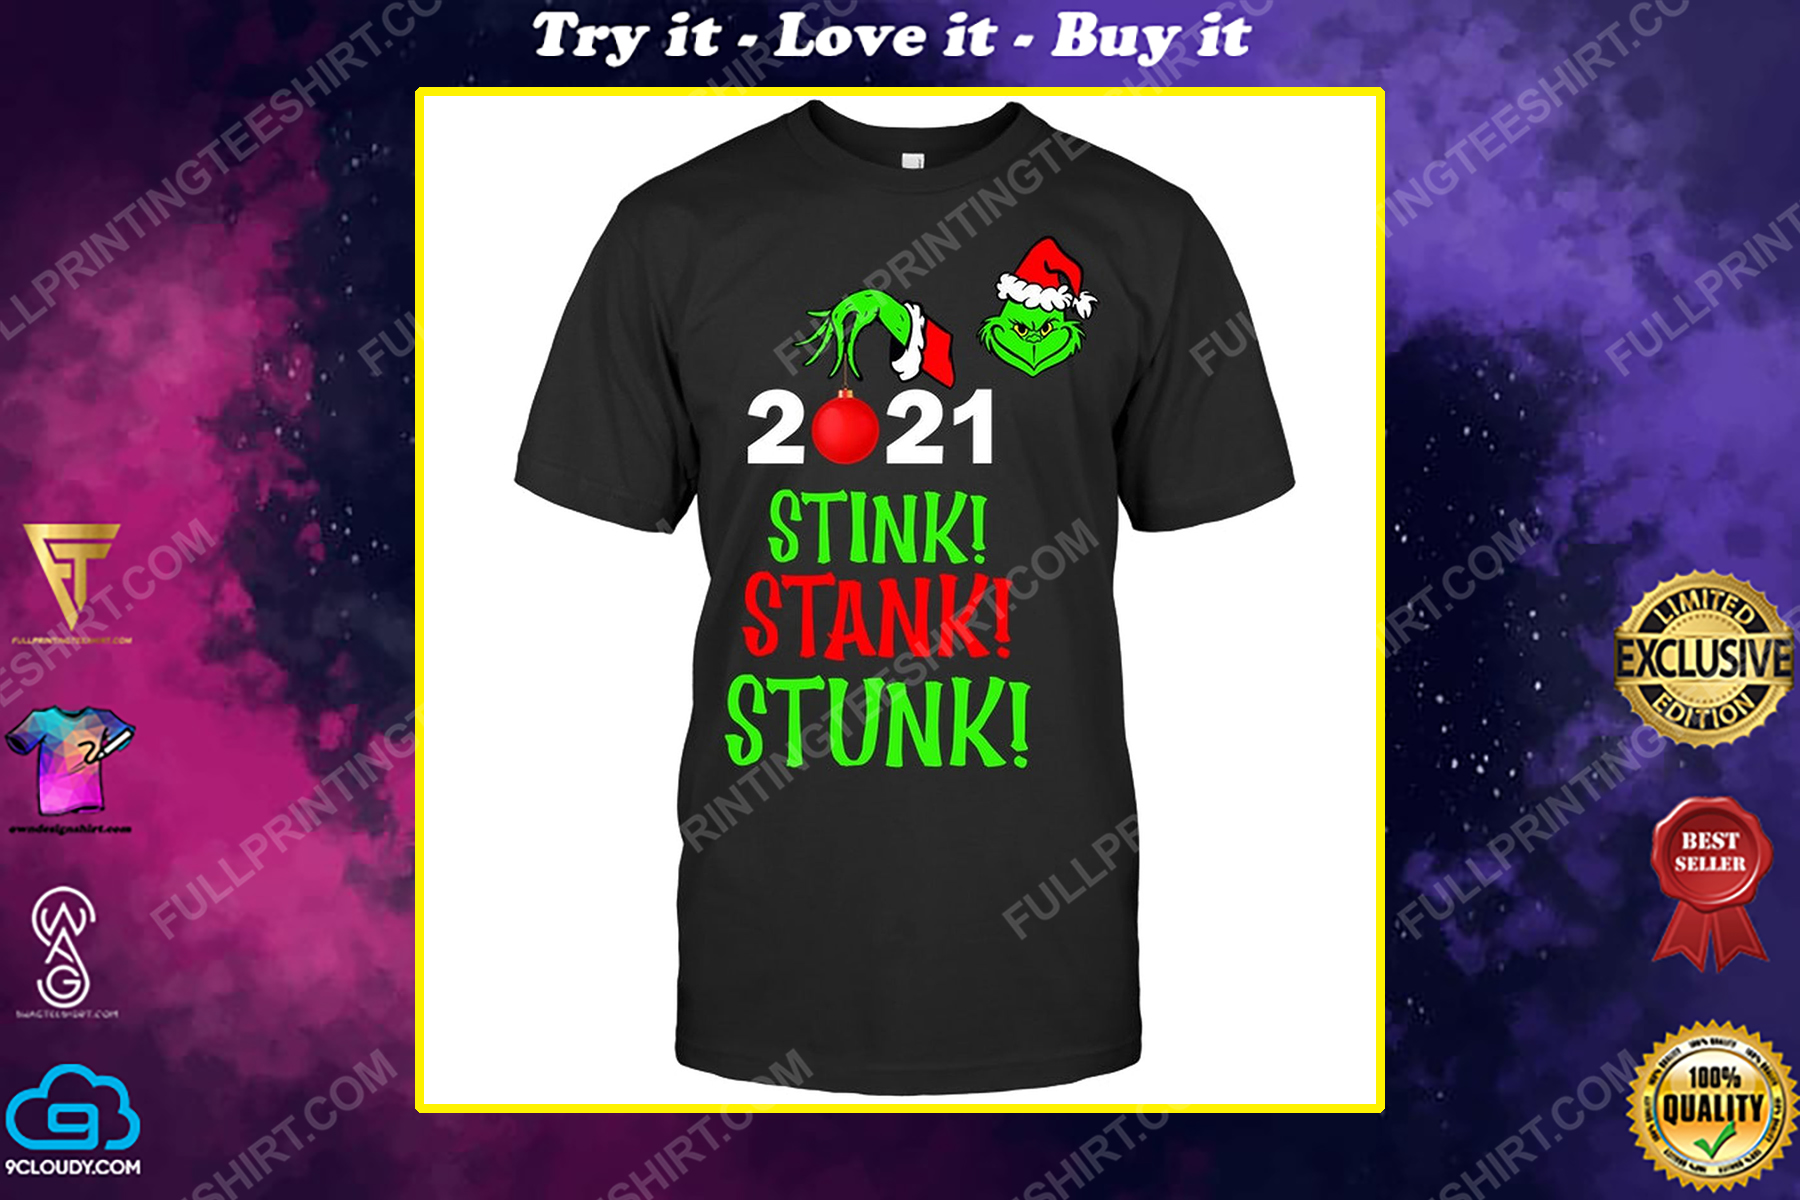 For christmas the grinch stink stank stunk 2021 shirt